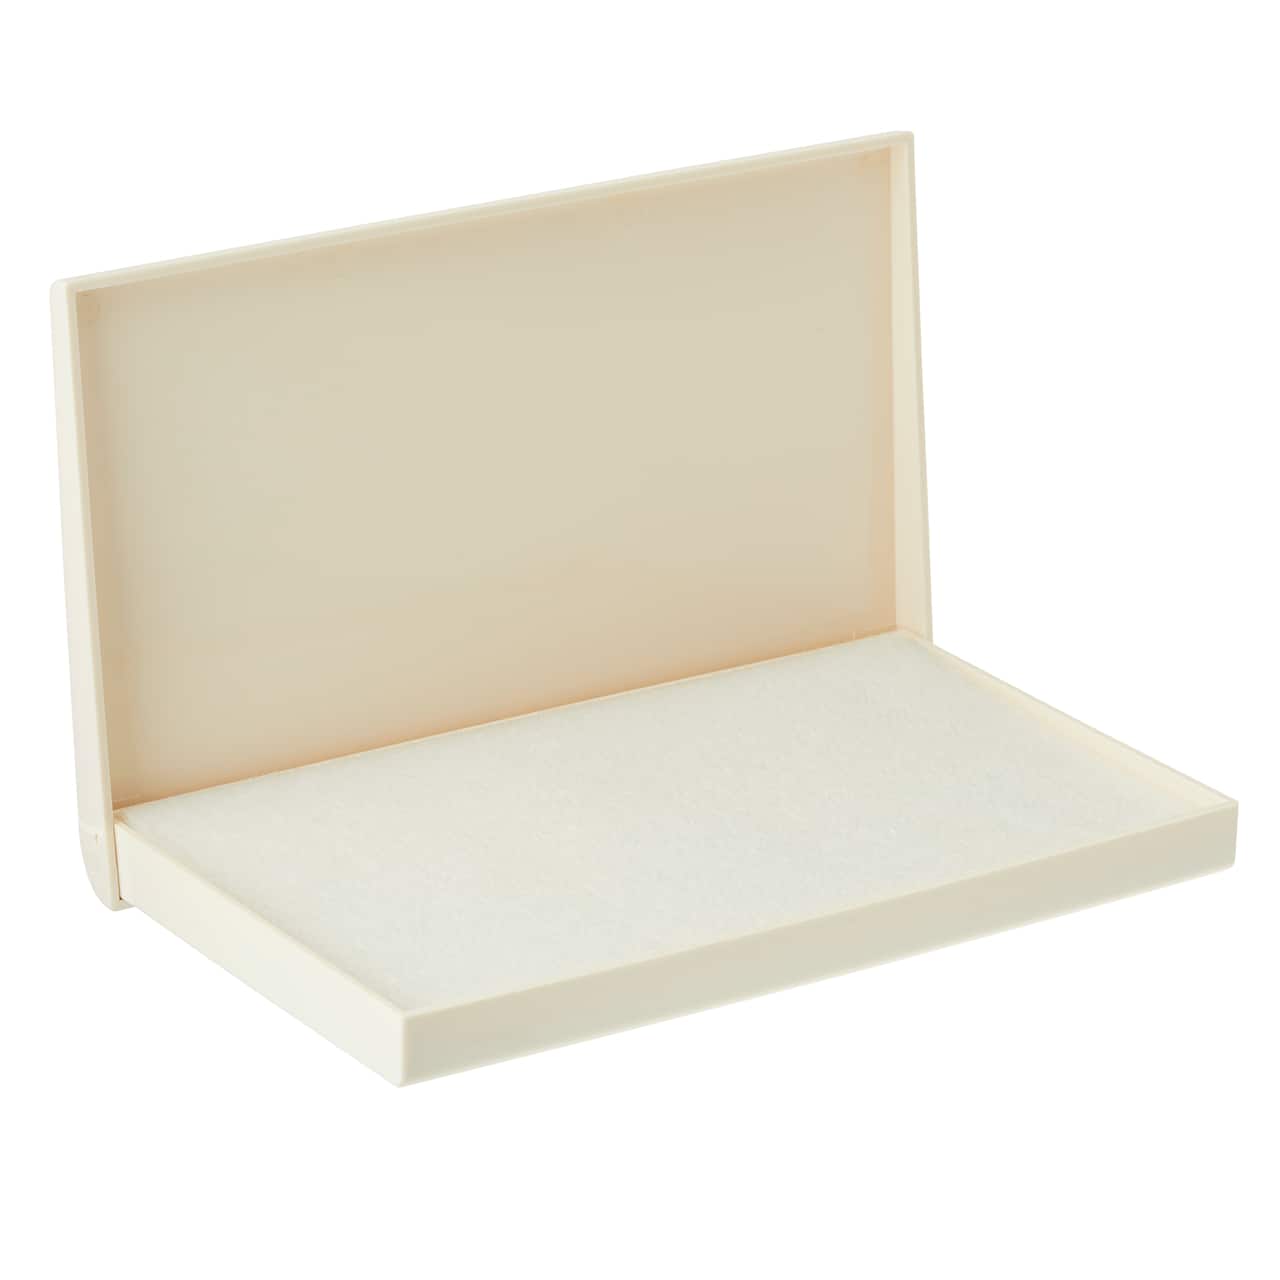 Recollections™ Stamp Cleaner Pad & Case